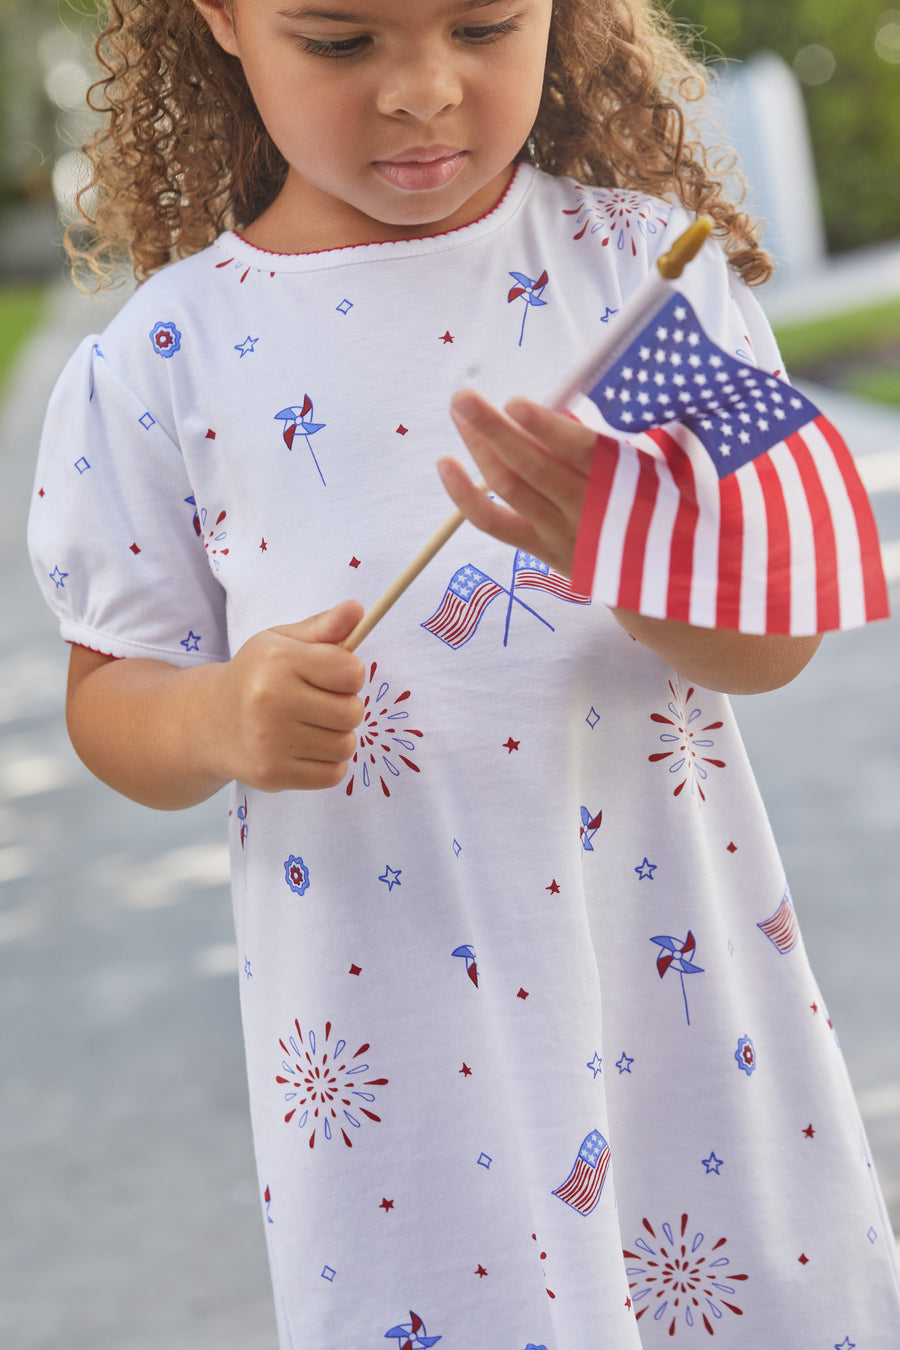 Little English traditional children’s clothing, girl's casual knit dress for spring, 4th of July outfit, patriotic flag print